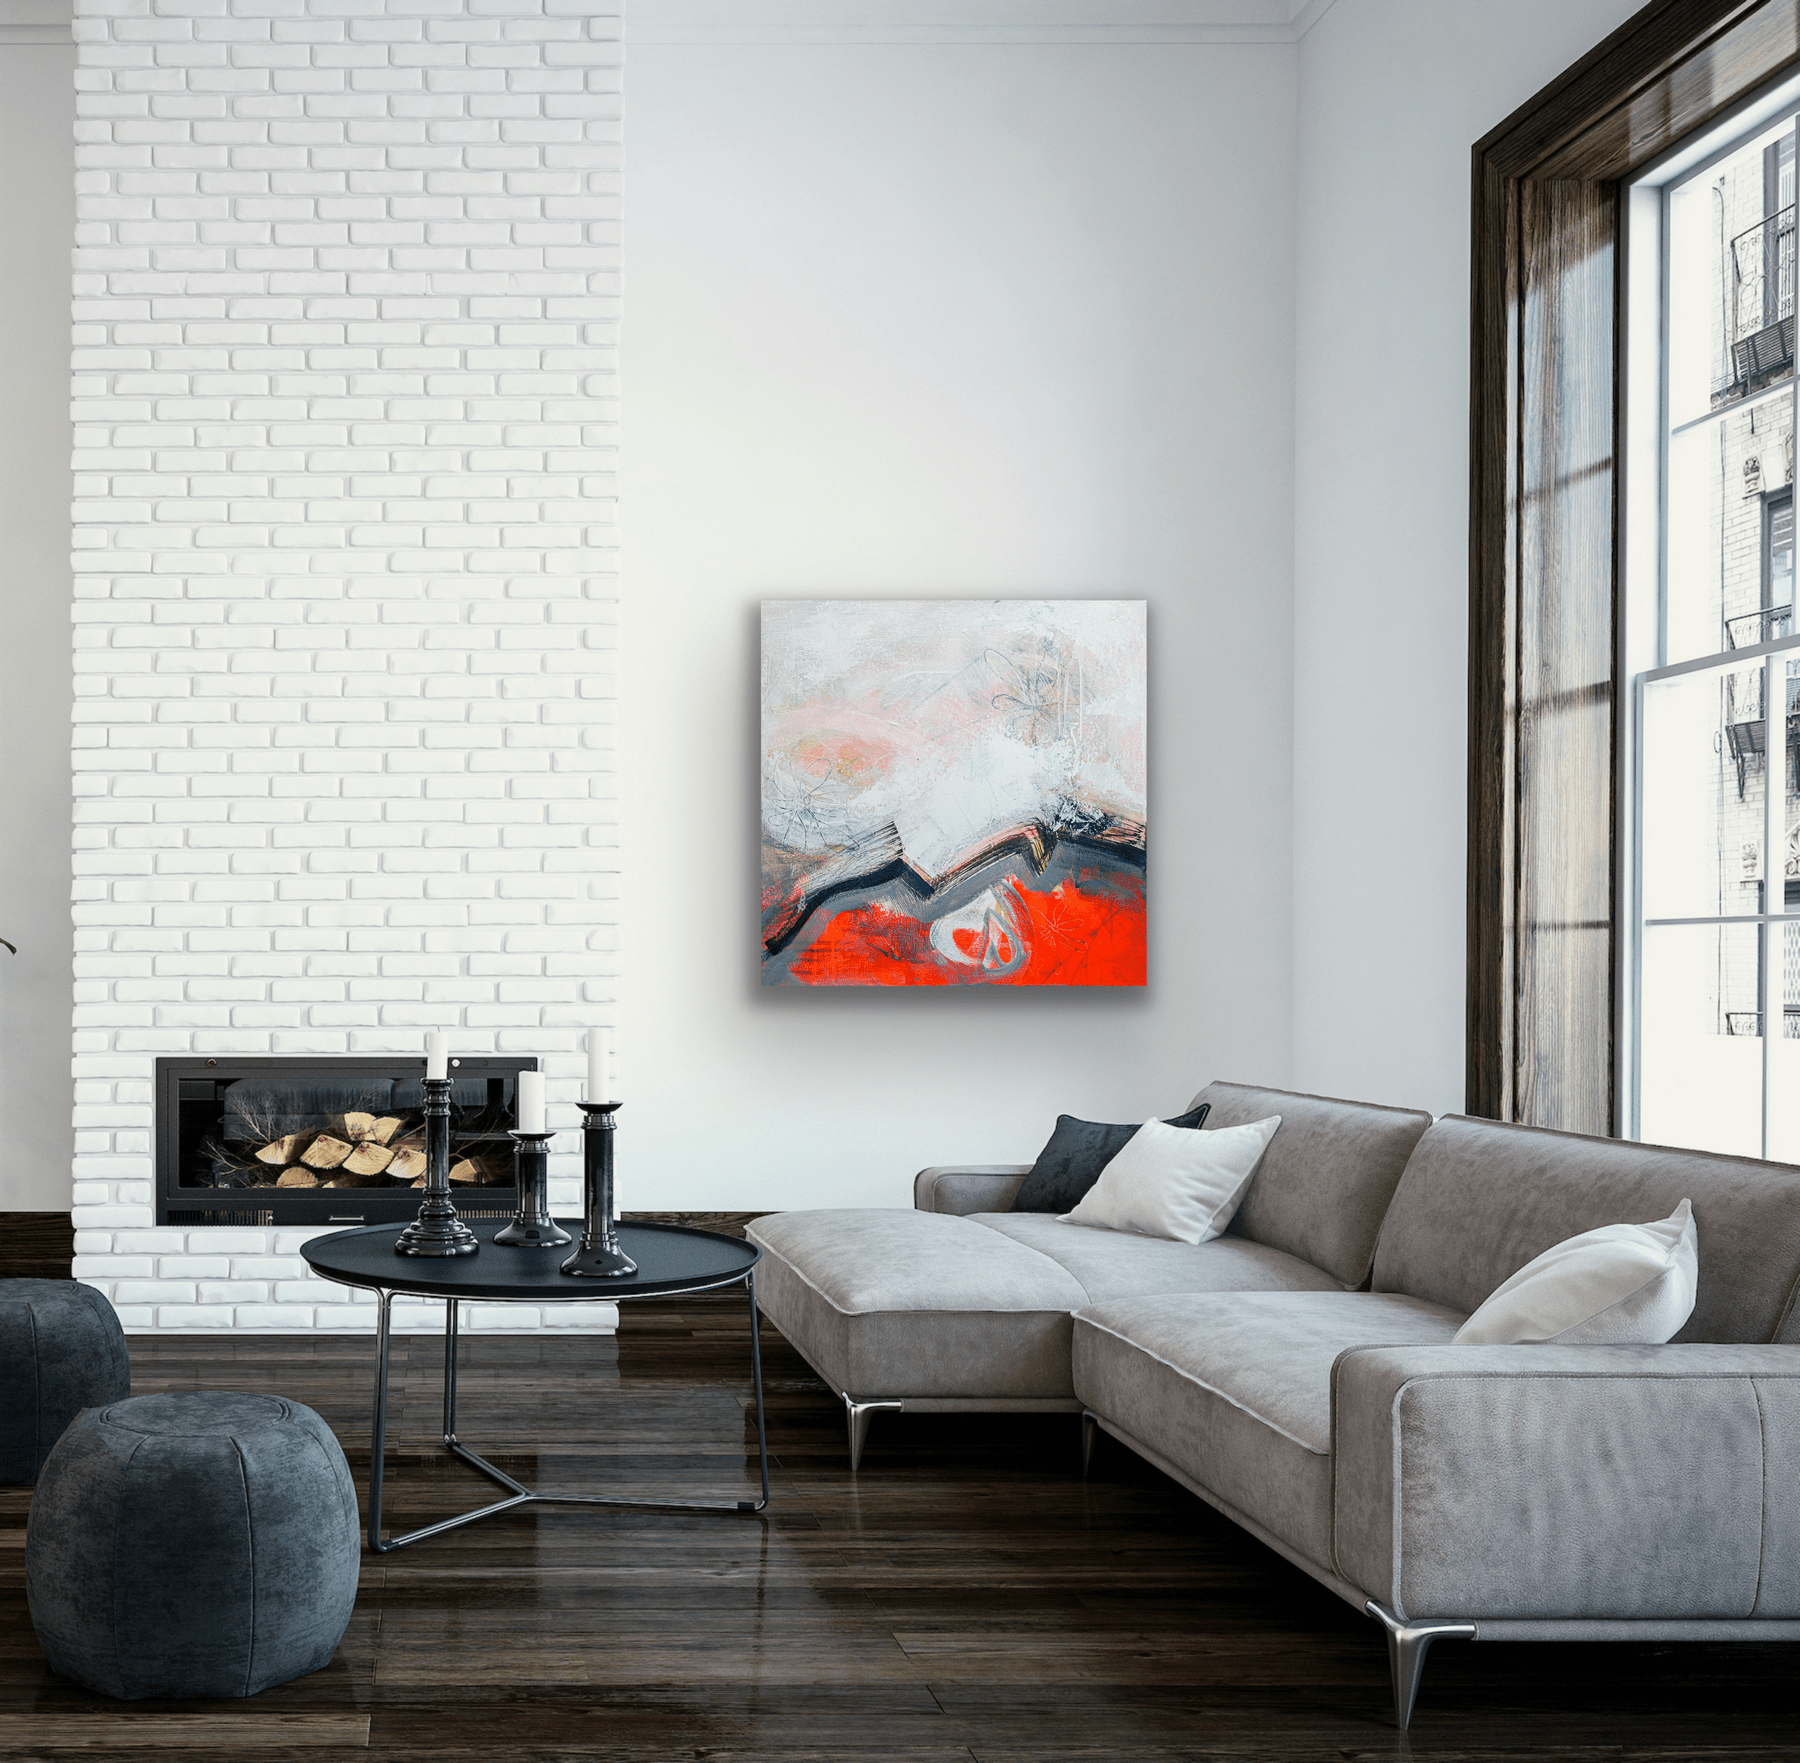 "Mother Moon" gallery wrapped canvas print comes in five different sizes to fit your living room wall all the way to your smaller bathroom wall.